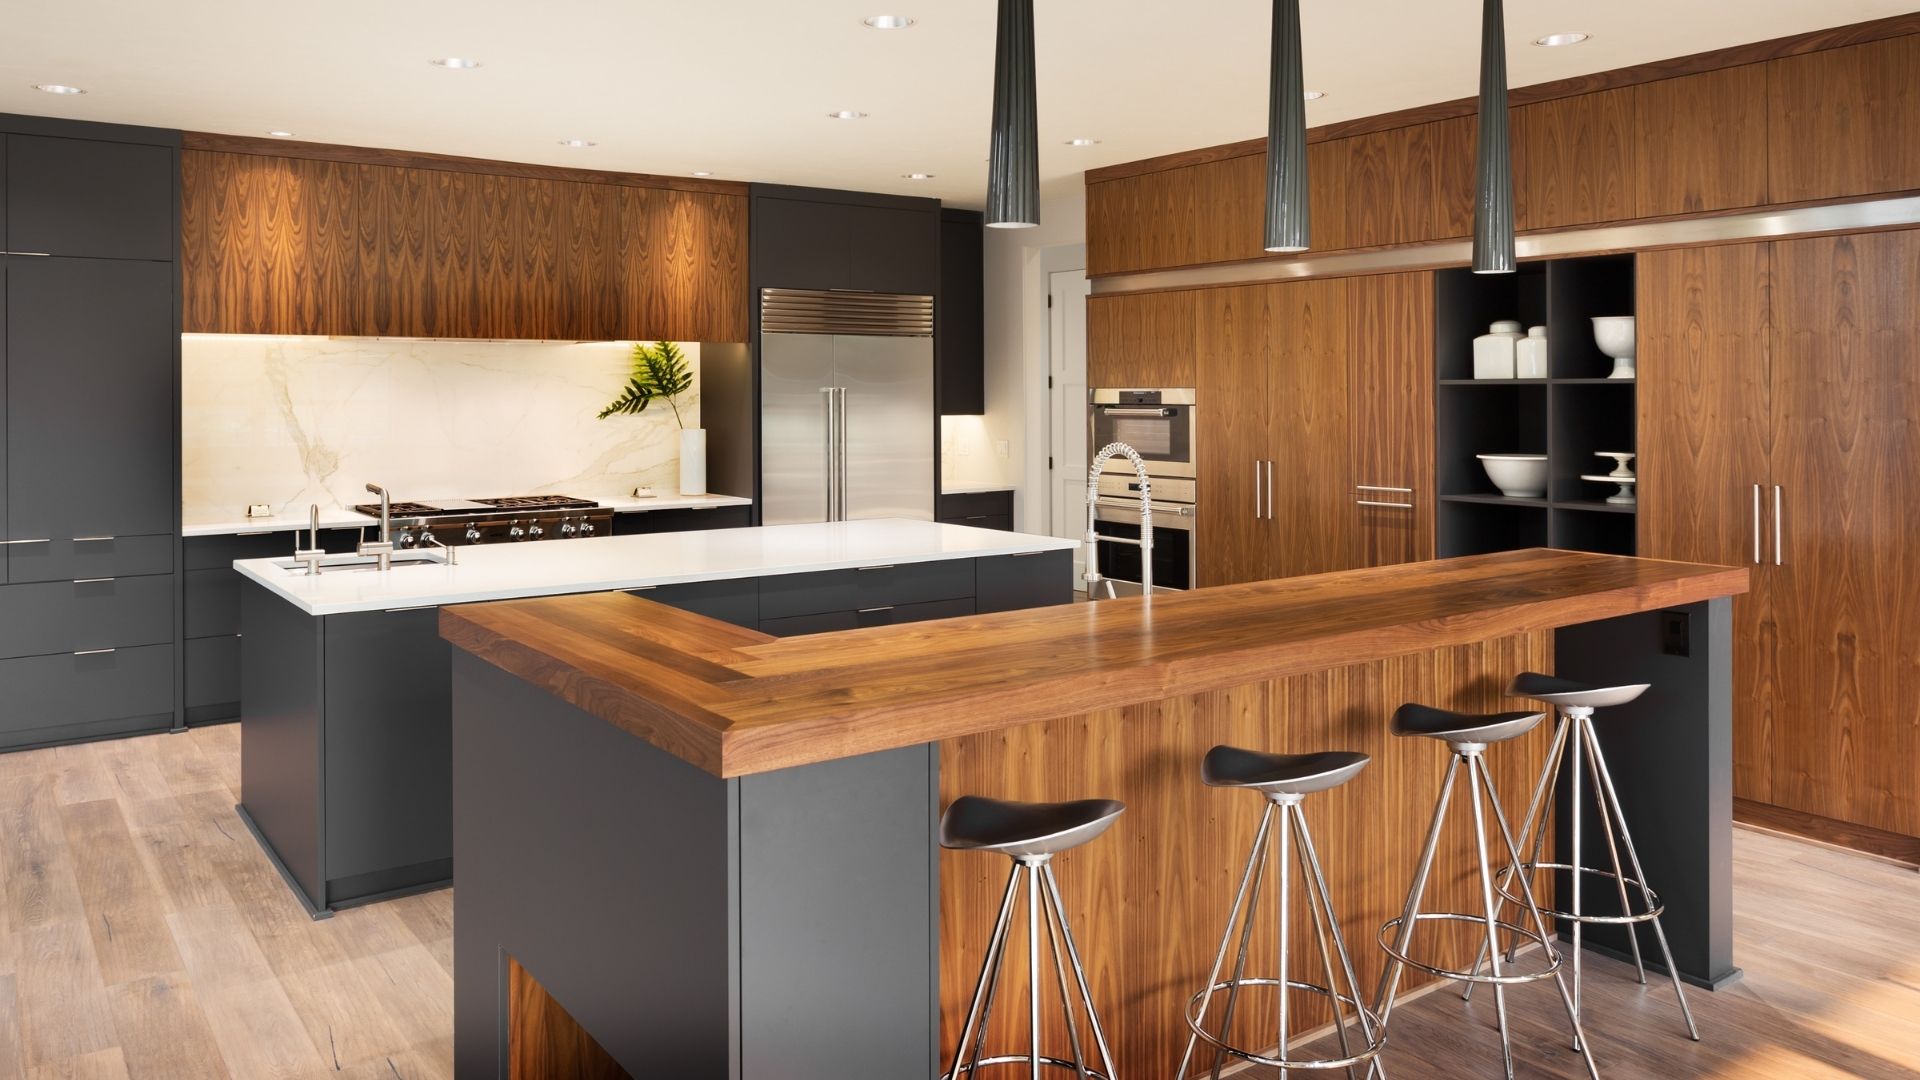 BPW plywood is ideal for your kitchen